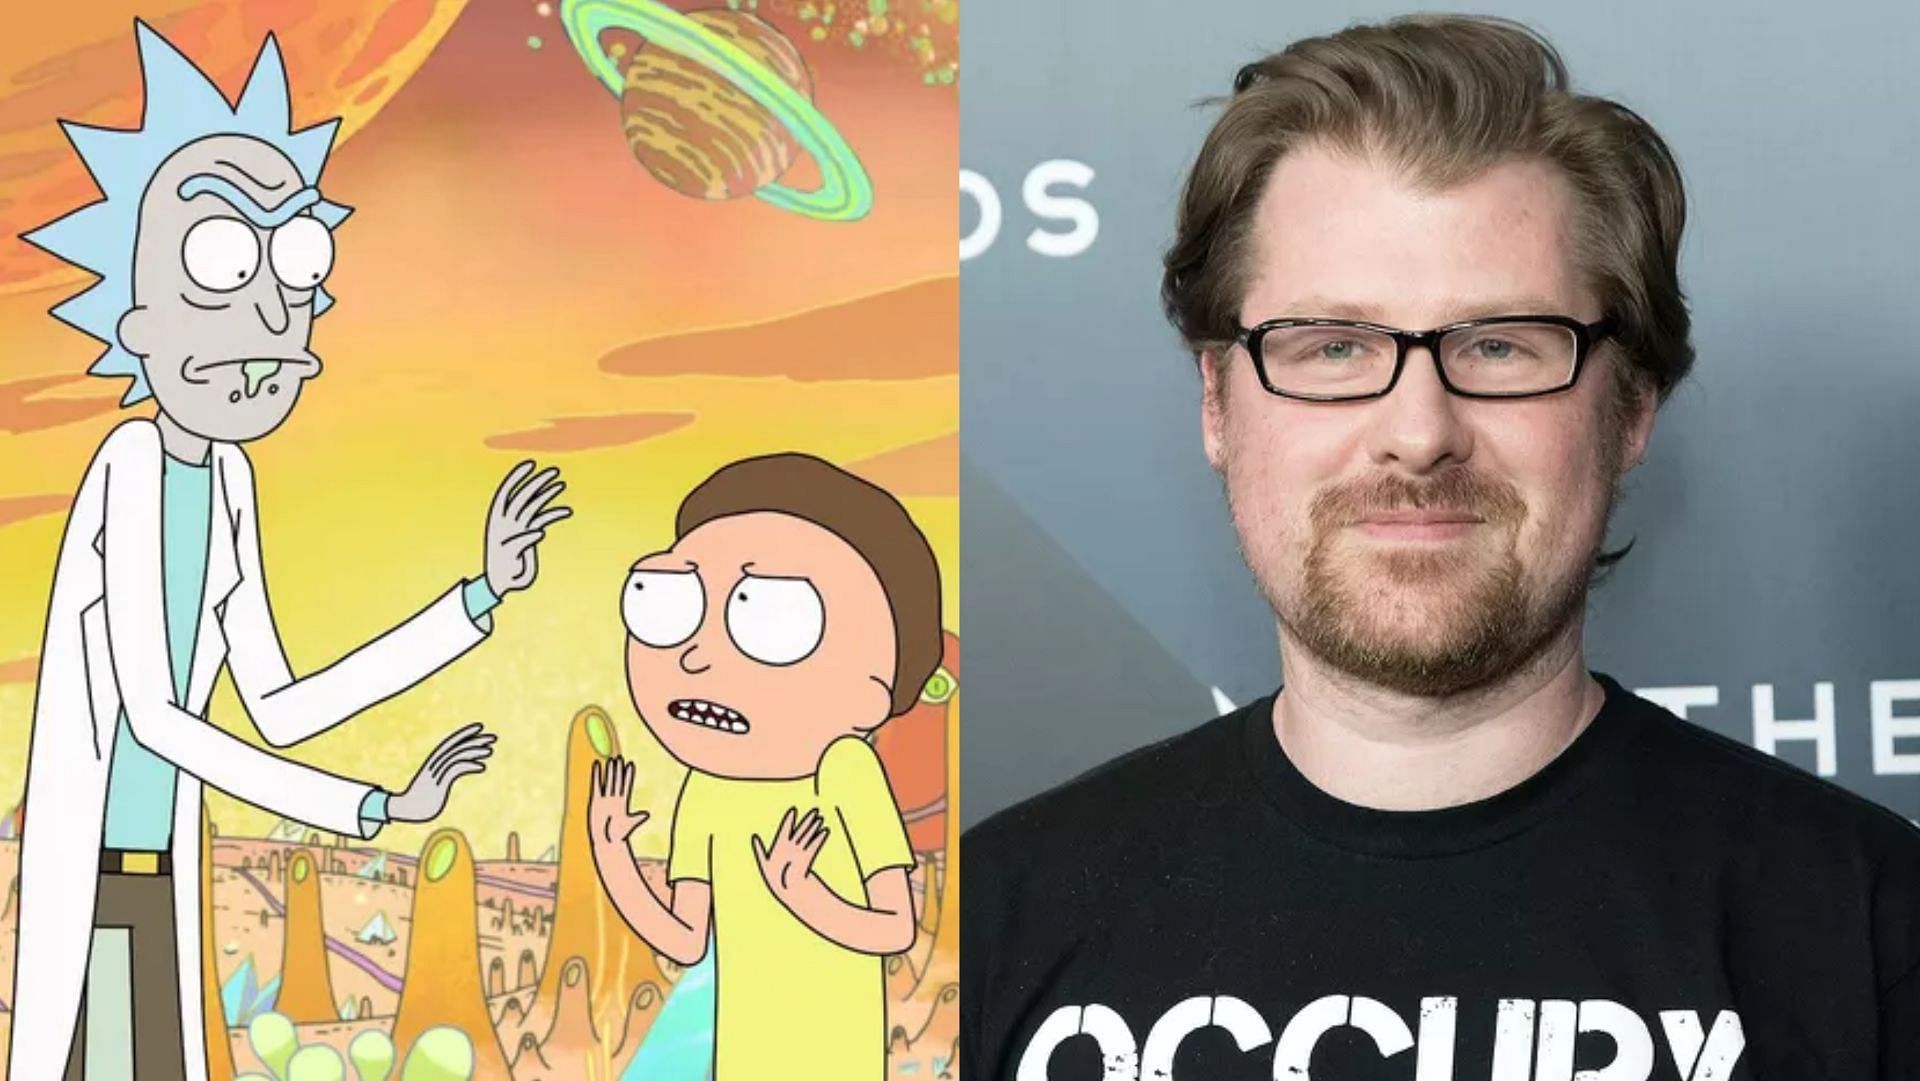 Adult Swim will be recasting the voice roles for Rick and Morty in the titular show as previous voice actor Justin Roiland faces domestic violence charges. (Image via Adult Swim, Getty Images)